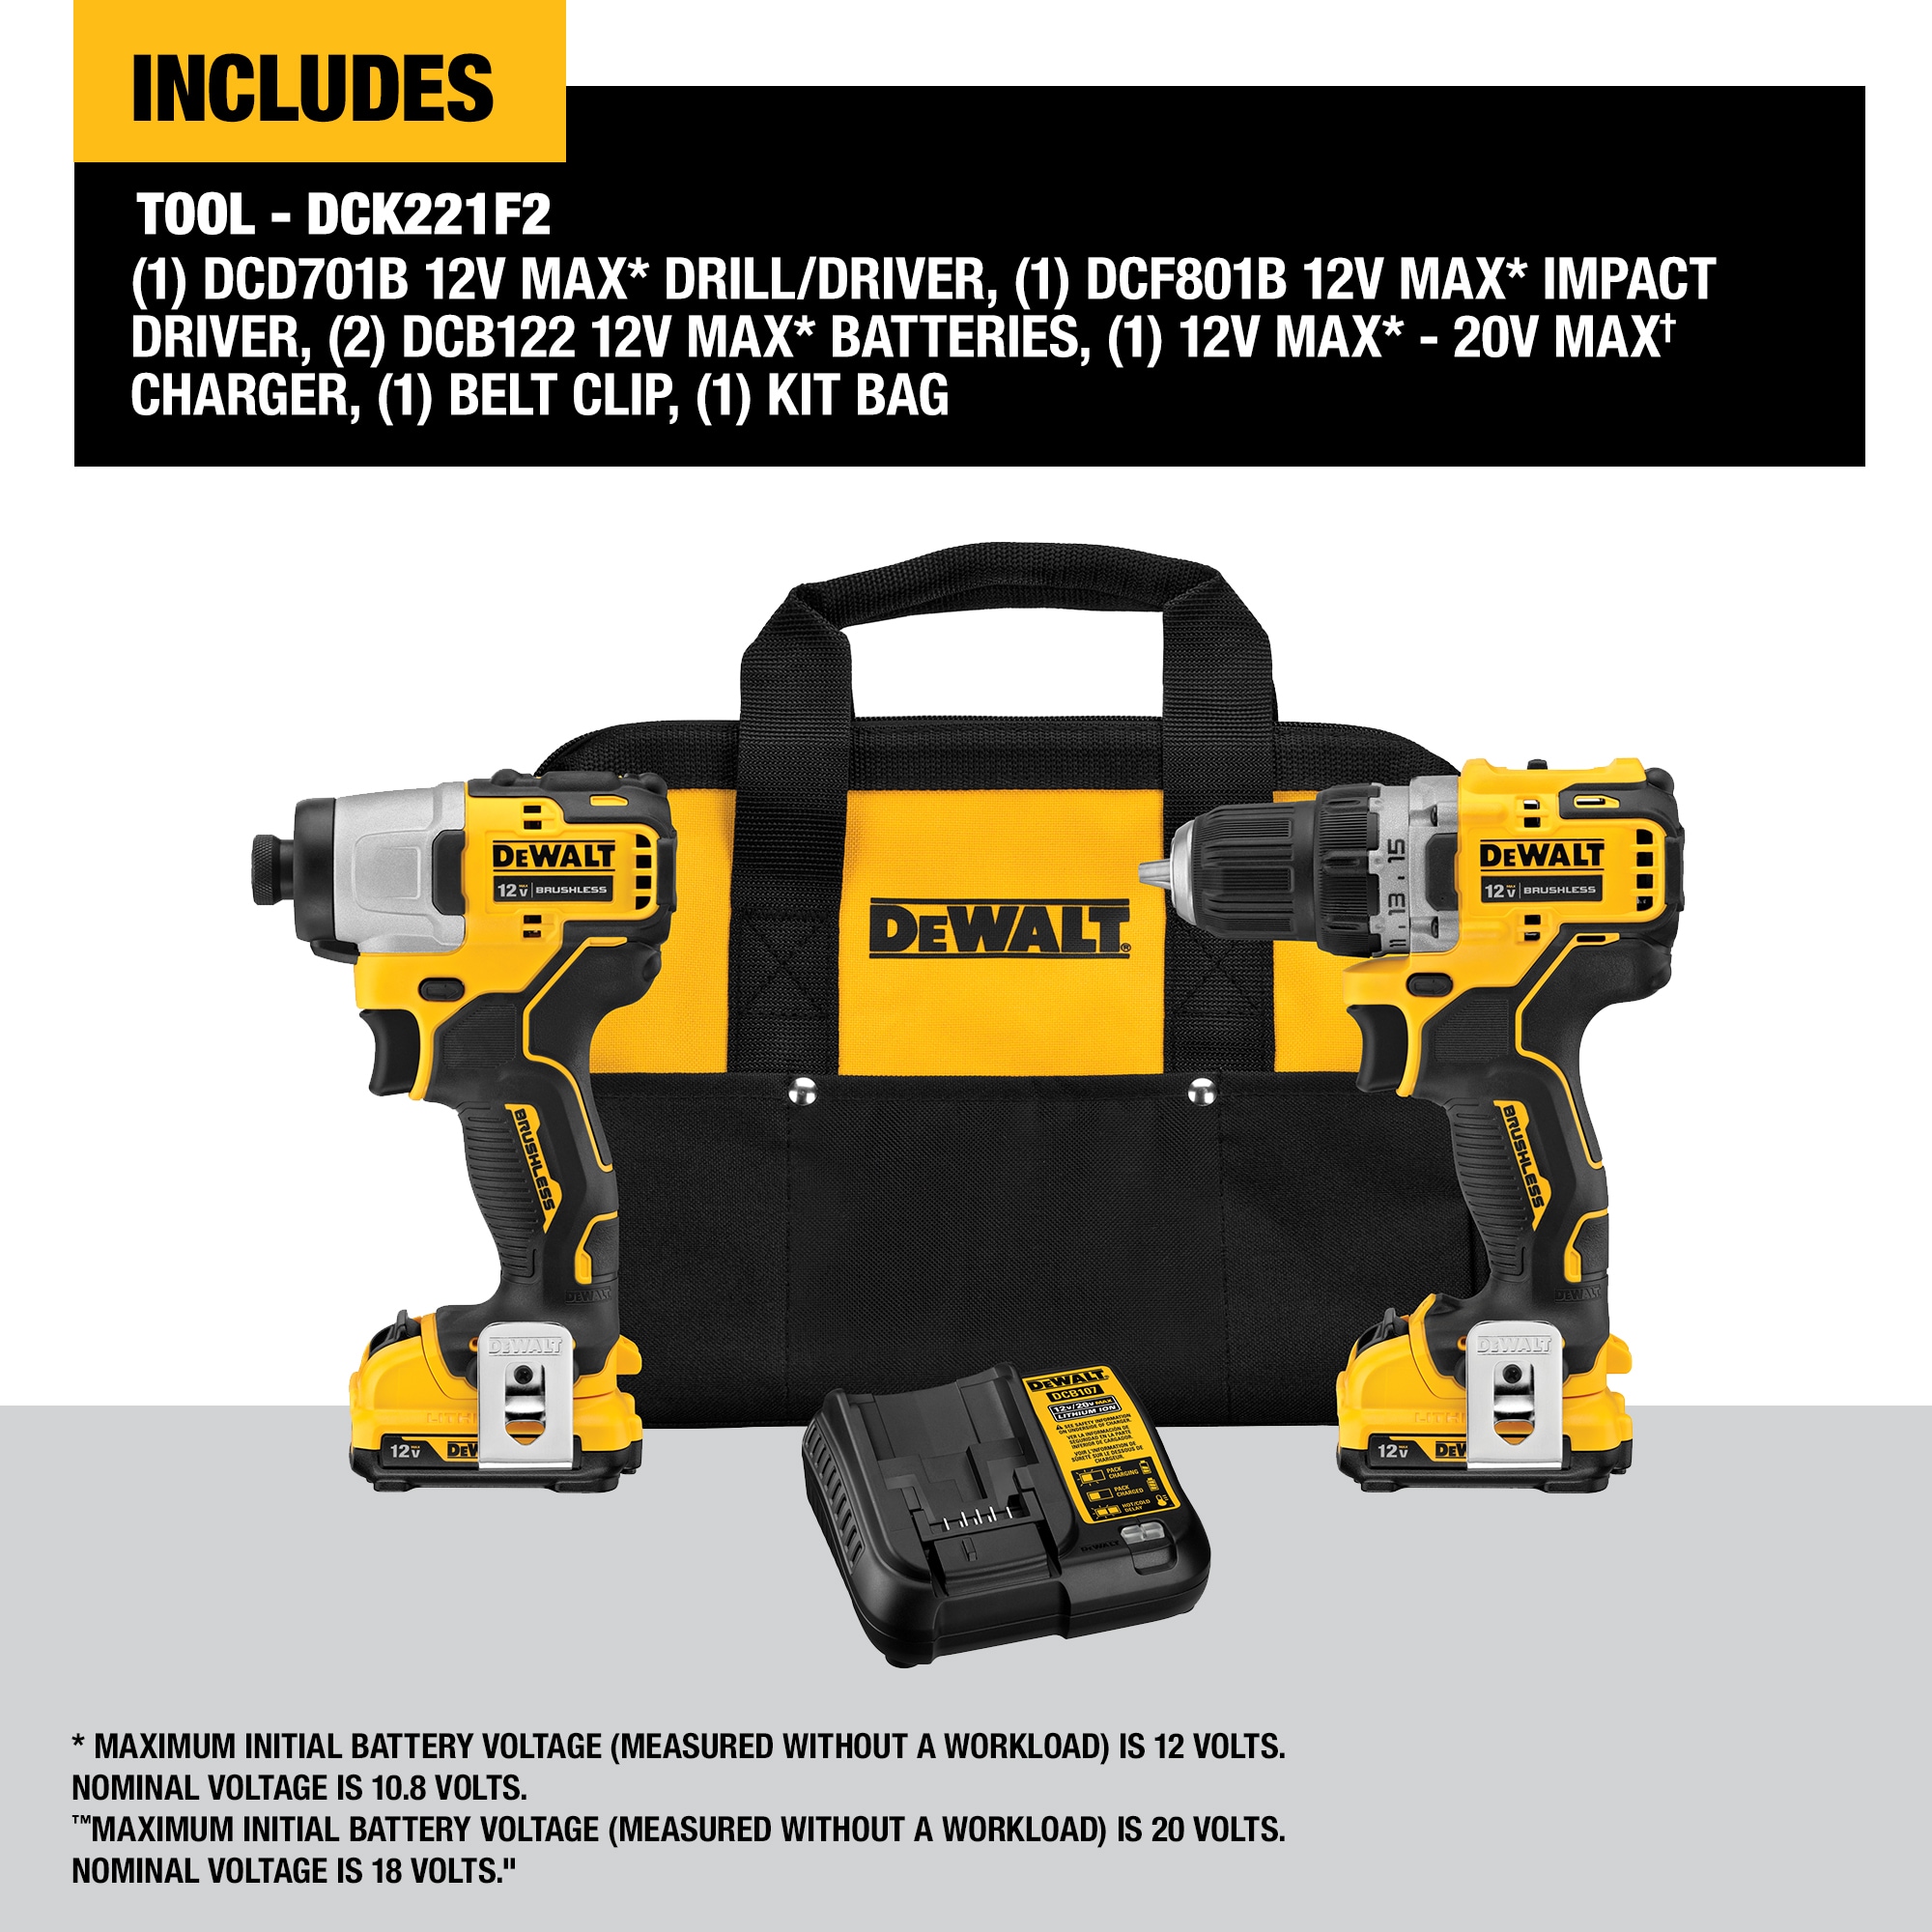 DEWALT XTREME 2-Tool 12V MAX XR Brushless DrilI/Impact Driver with Bag (2-Batteries and Charger Included) in the Power Tool Combo Kits at Lowes.com